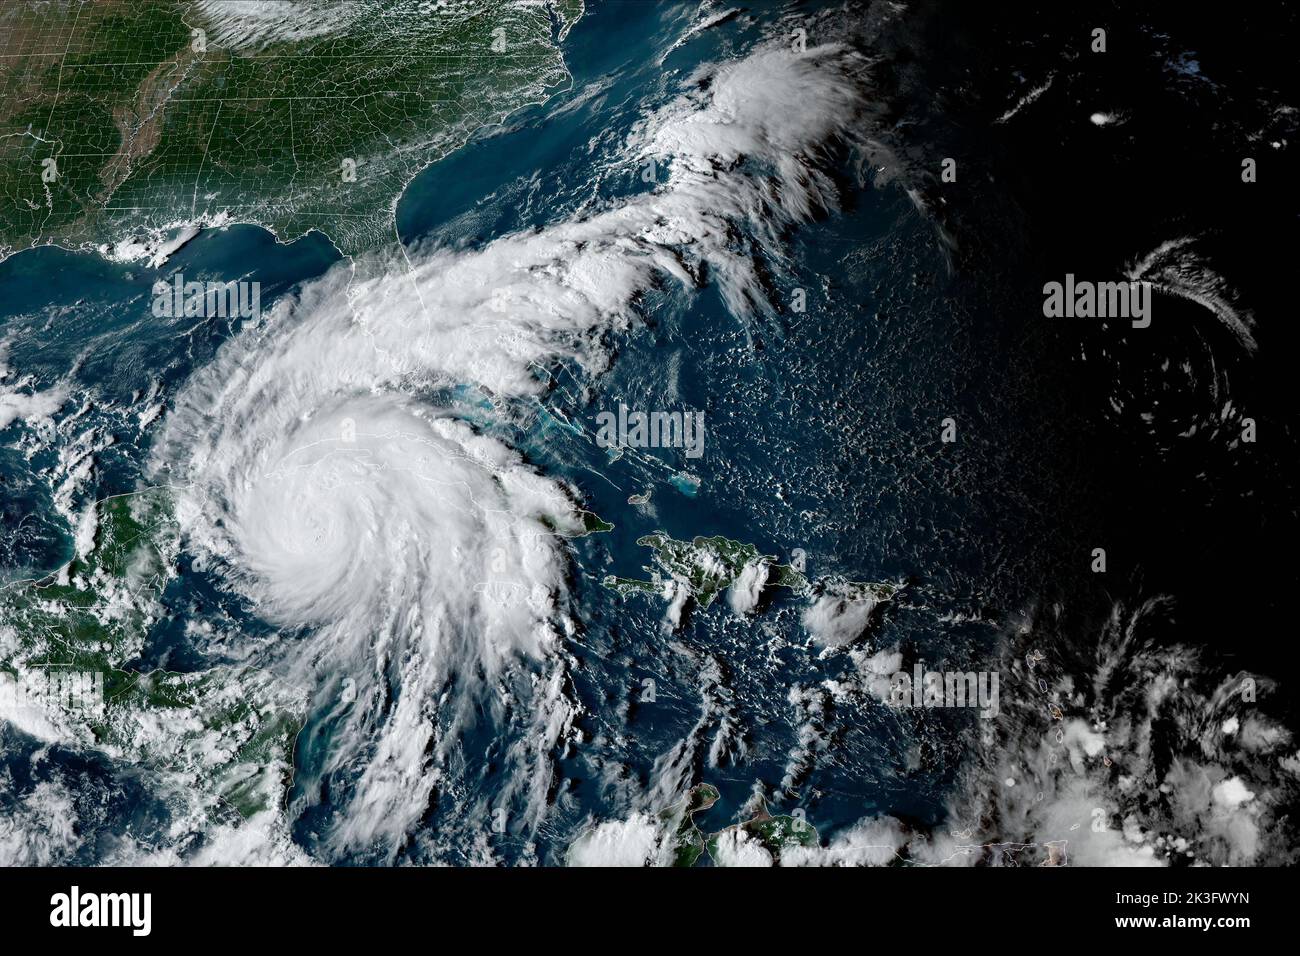 Washington, United States. 26th Sep, 2022. Hurricane Ian is pictured at 5:29 PM EST on Monday, September 26, 2022, as it approaches western Cuba, where it's expected to make landfall overnight before emerging over the southeastern Gulf of Mexico on Tuesday. Forecasters see Hurricane Ian approaching the west coast of Florida on Wednesday into Thursday, where Gov. Ron DeSantis has declared a state of emergency throughout the entire state. Photo by NOAA/UPI Credit: UPI/Alamy Live News Stock Photo